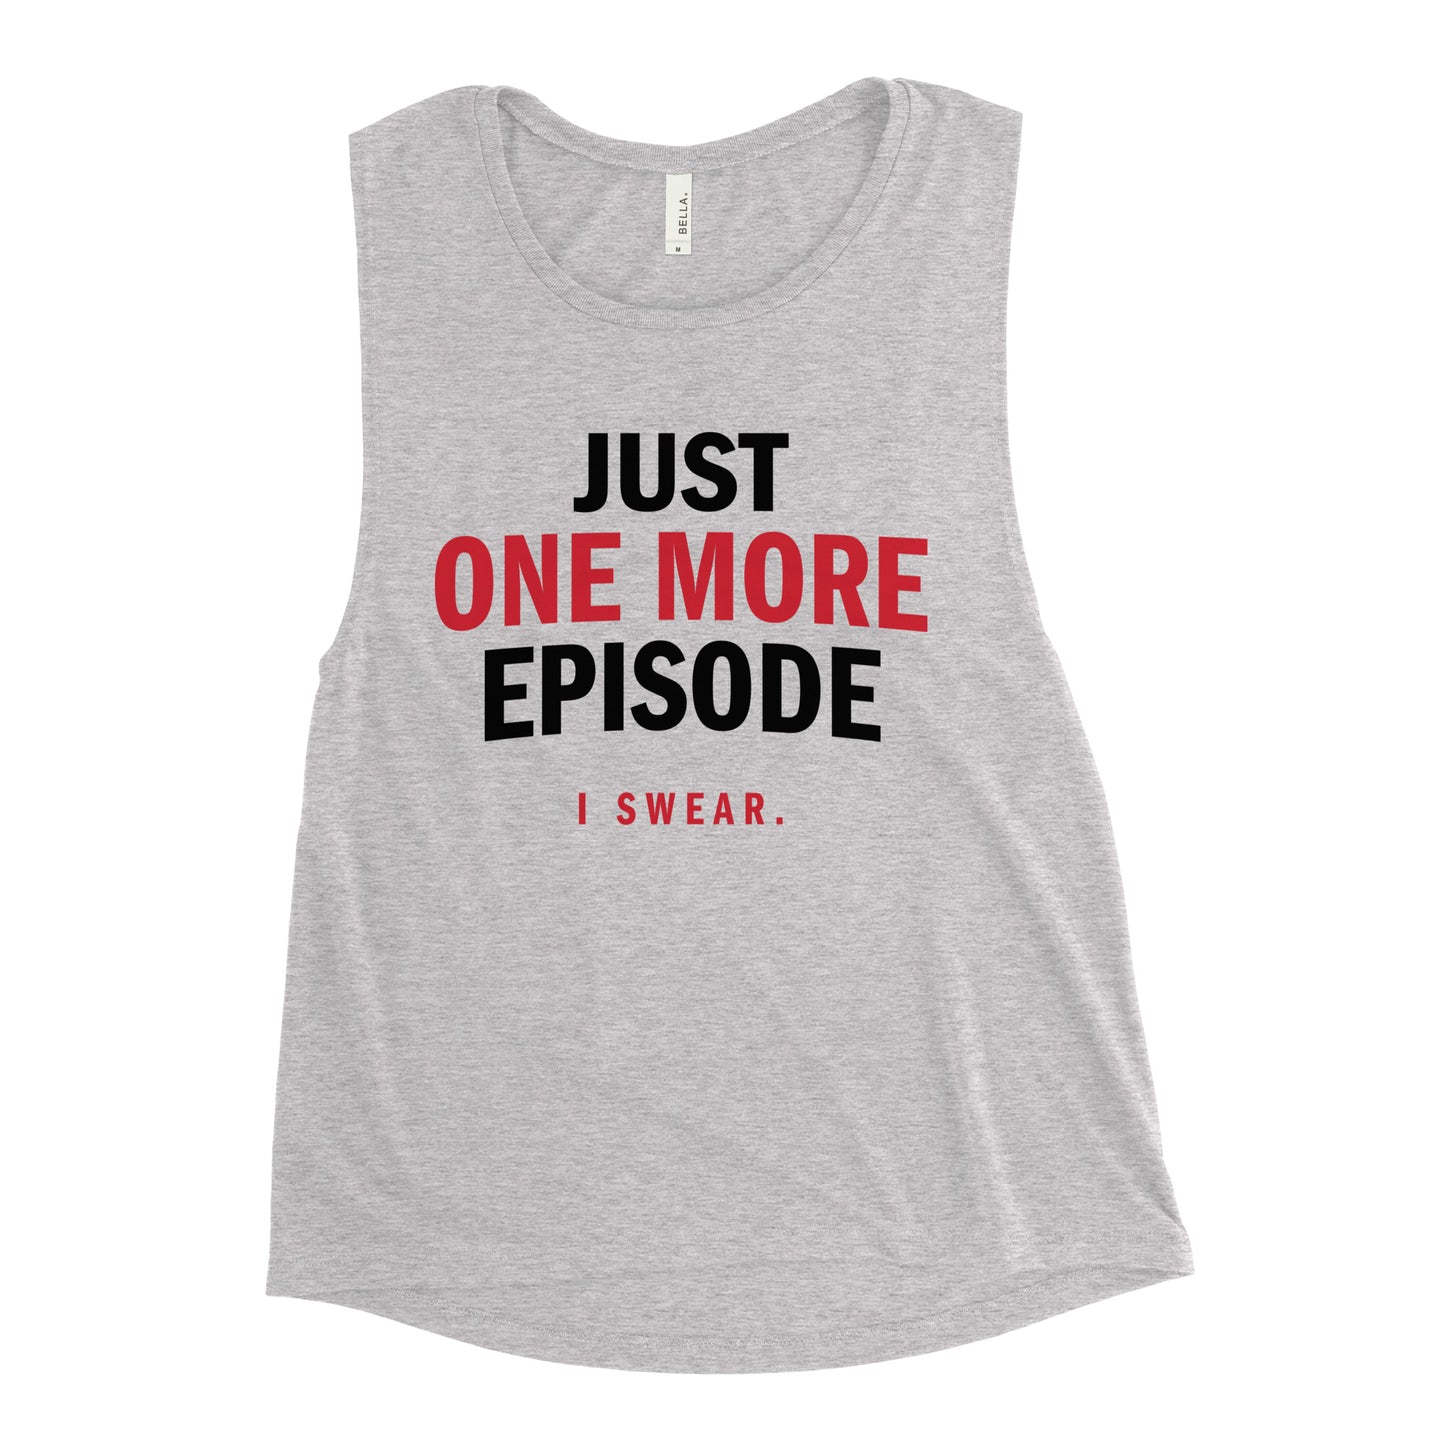 Just One More Episode Women's Muscle Tank